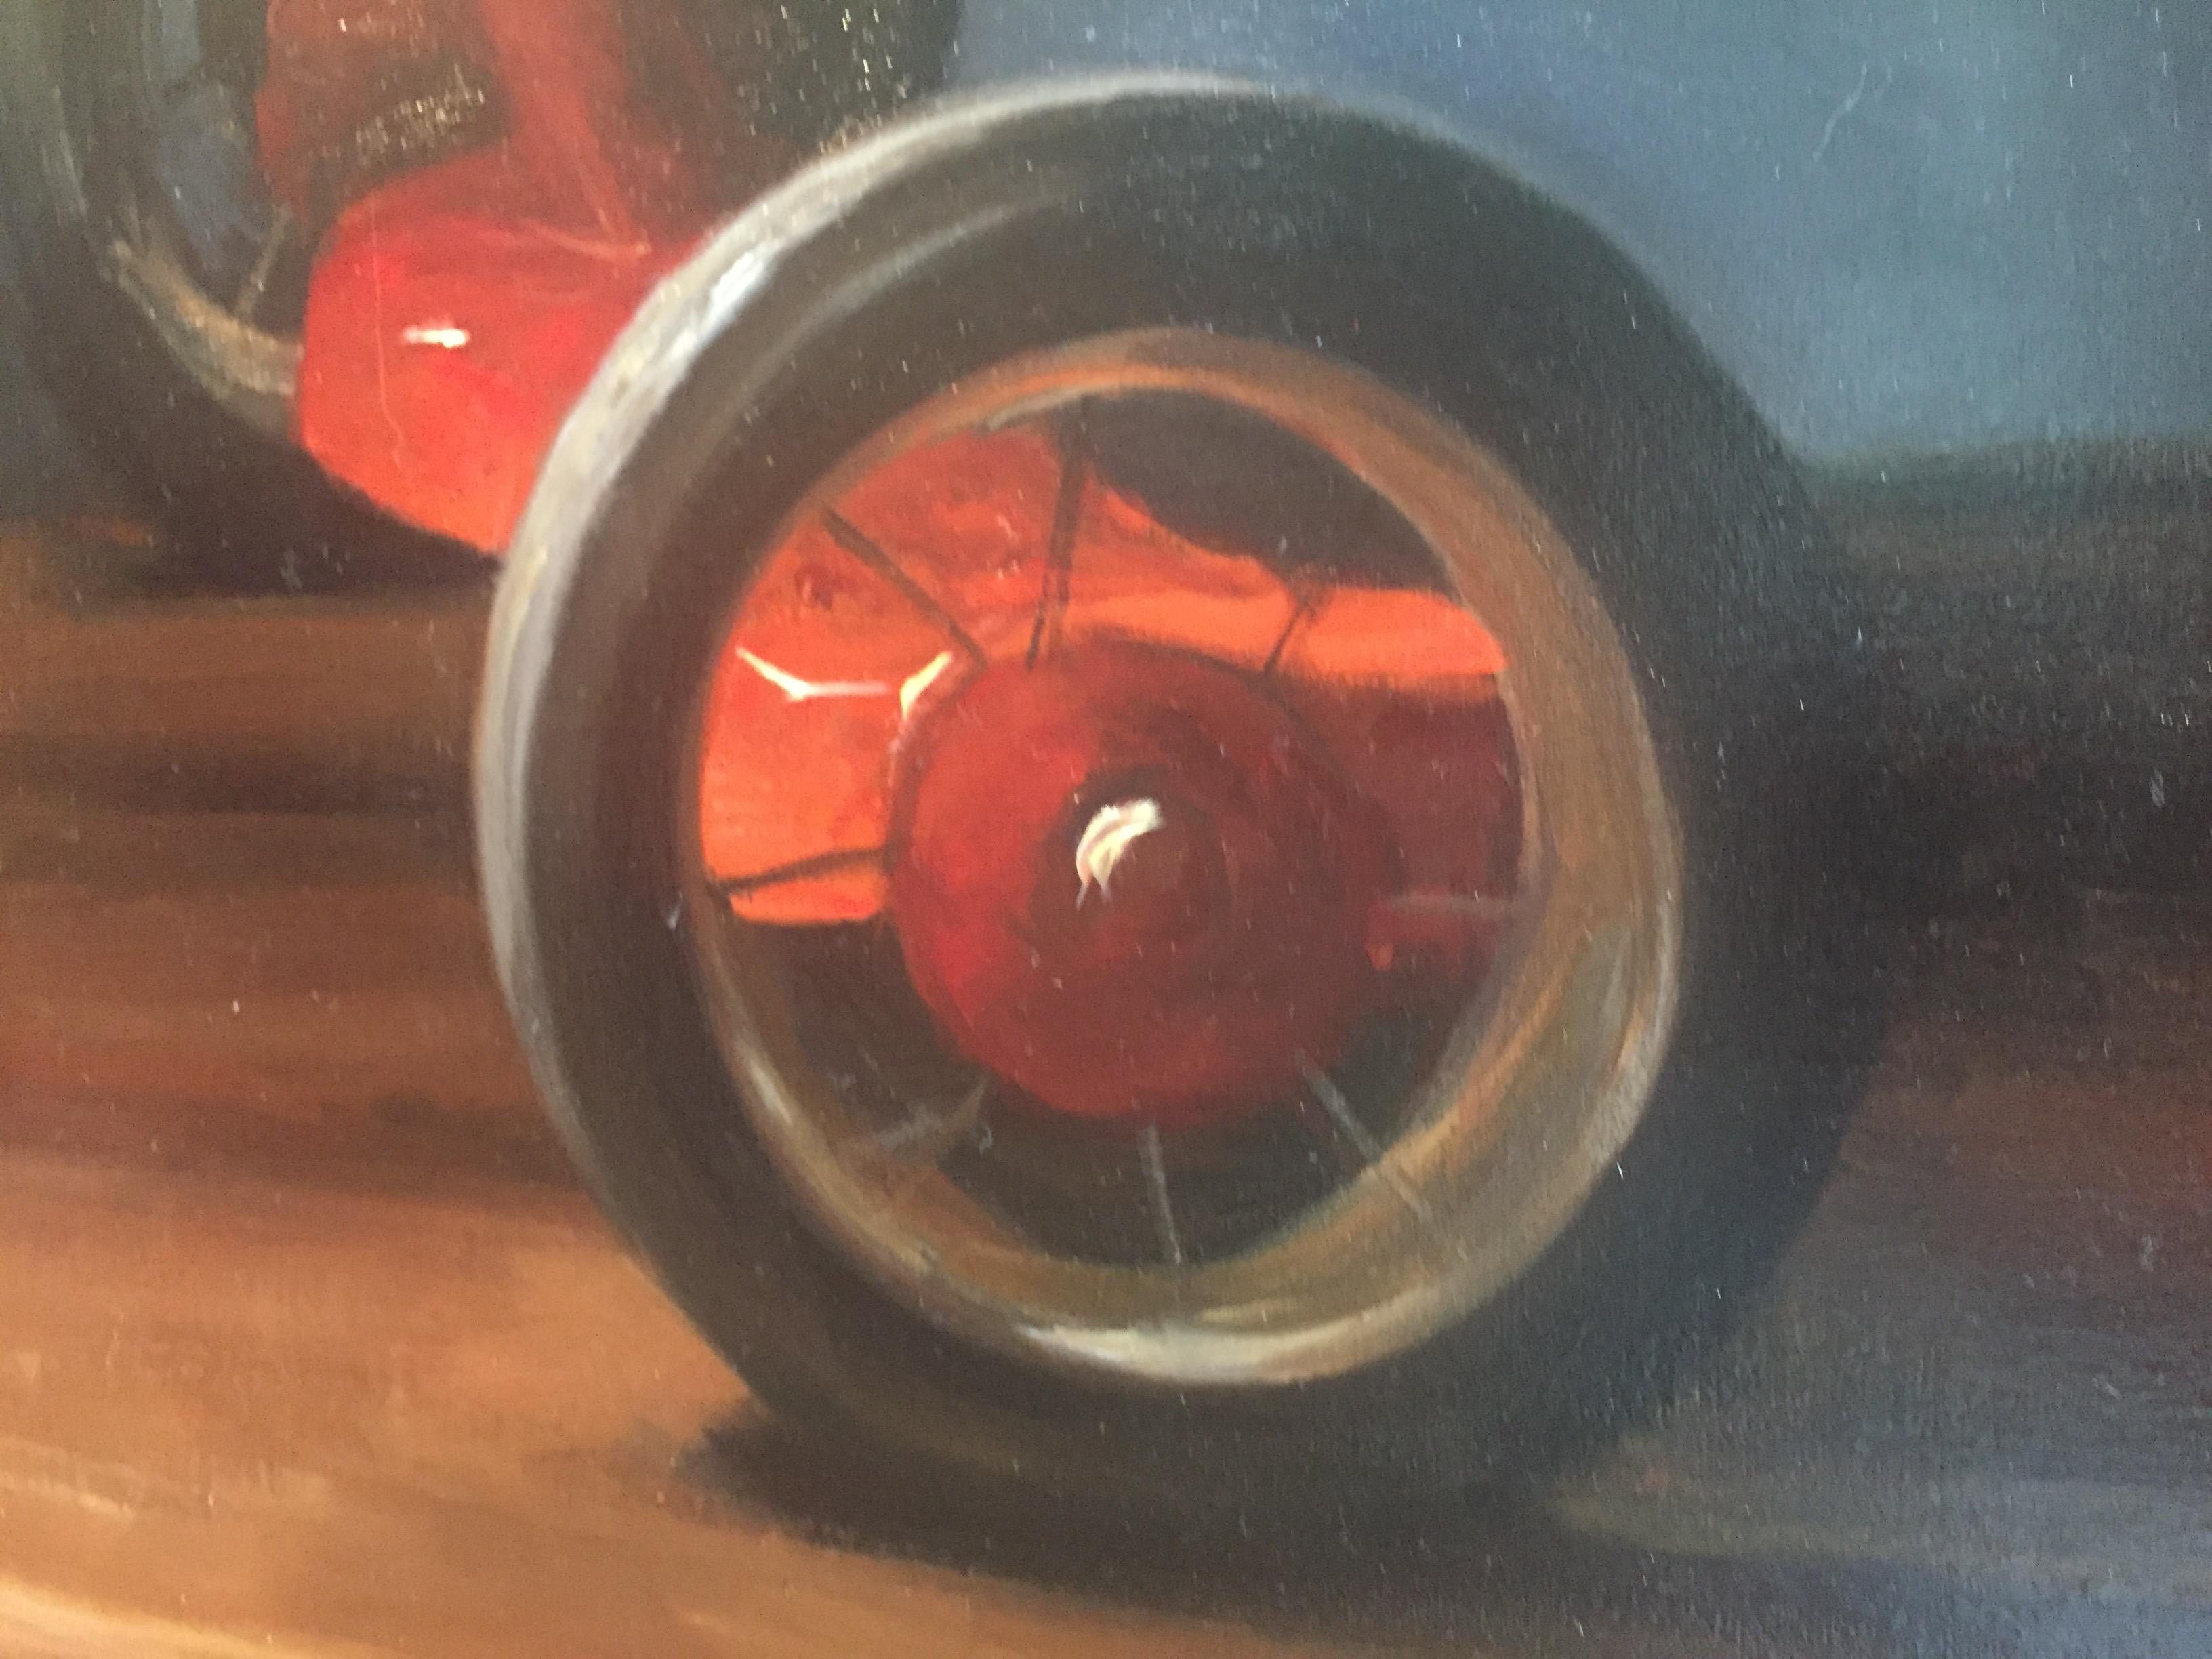 A traditional oil still life painting. In the style of classical realism, or poetic realism. 

An old red trike, or tricycle, is the subject of this oil painting.  Placed atop a wooden surface, lit from above in a dark, trimmed doors.

Framed